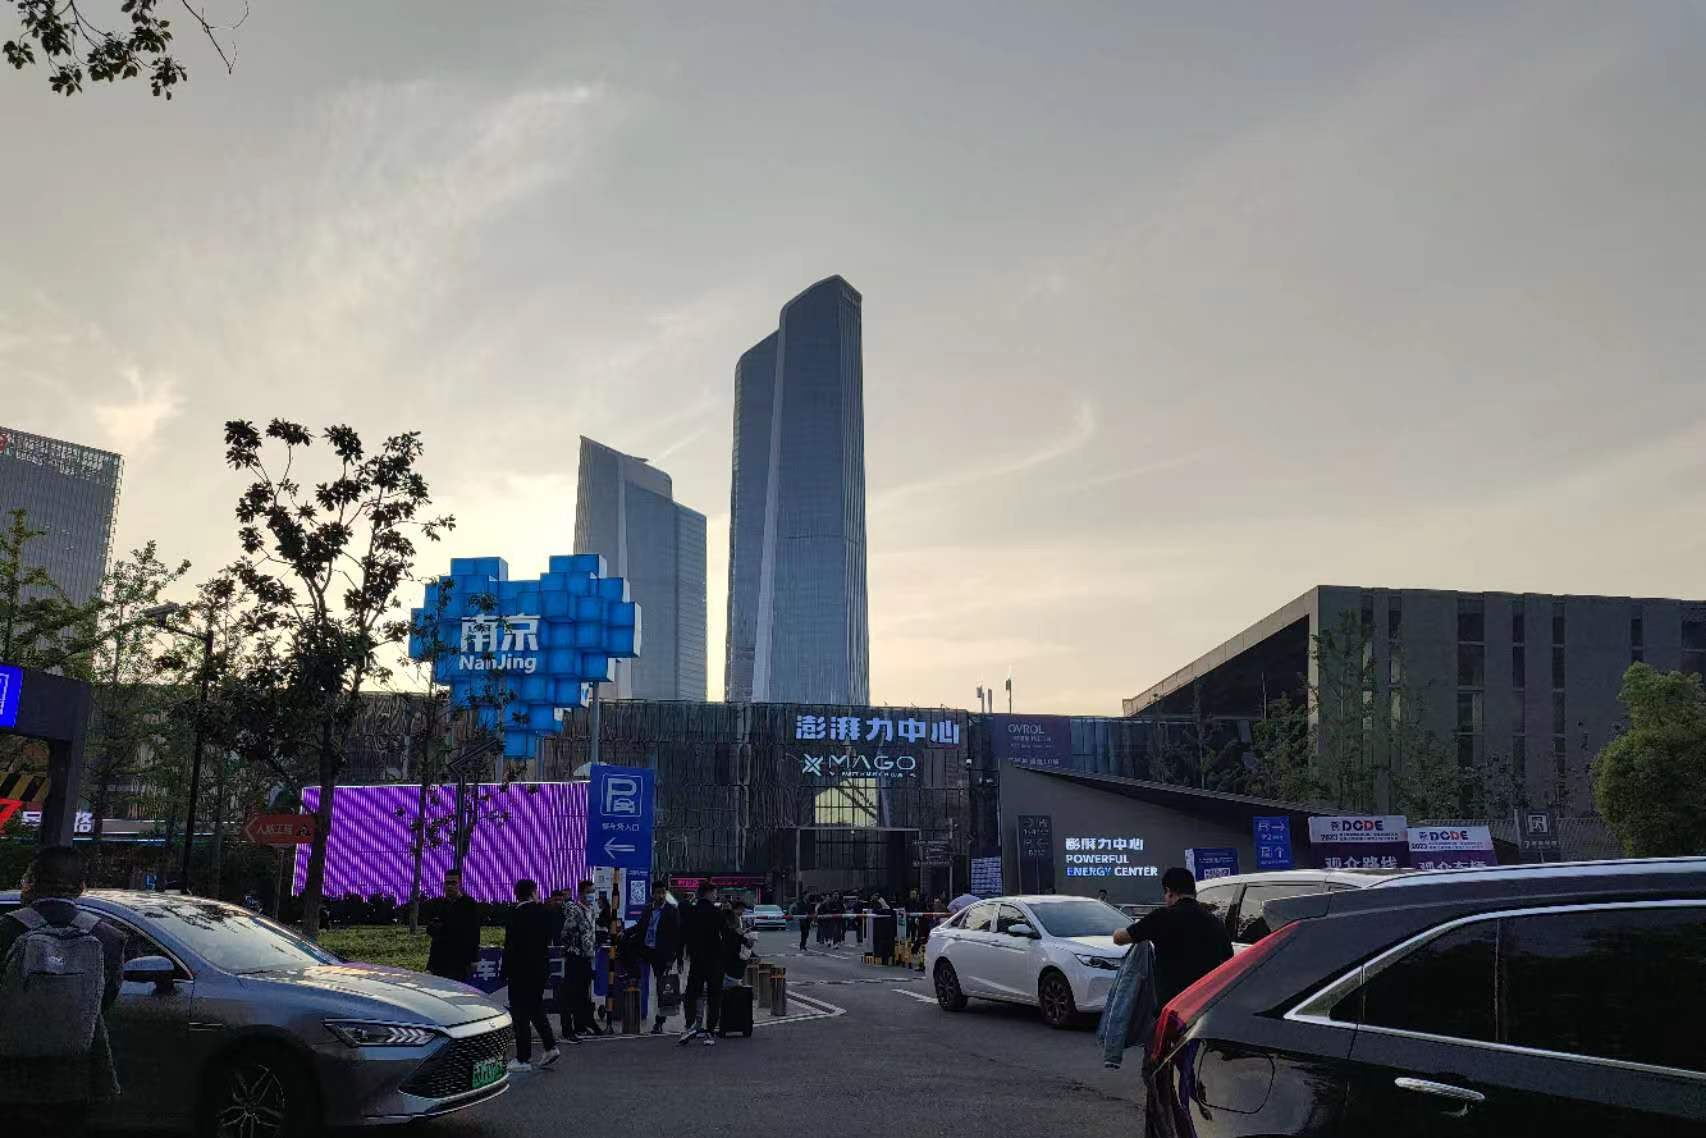 JMD TOOK PART IN THE 10TH DCDE EXPO IN NANJING CITY